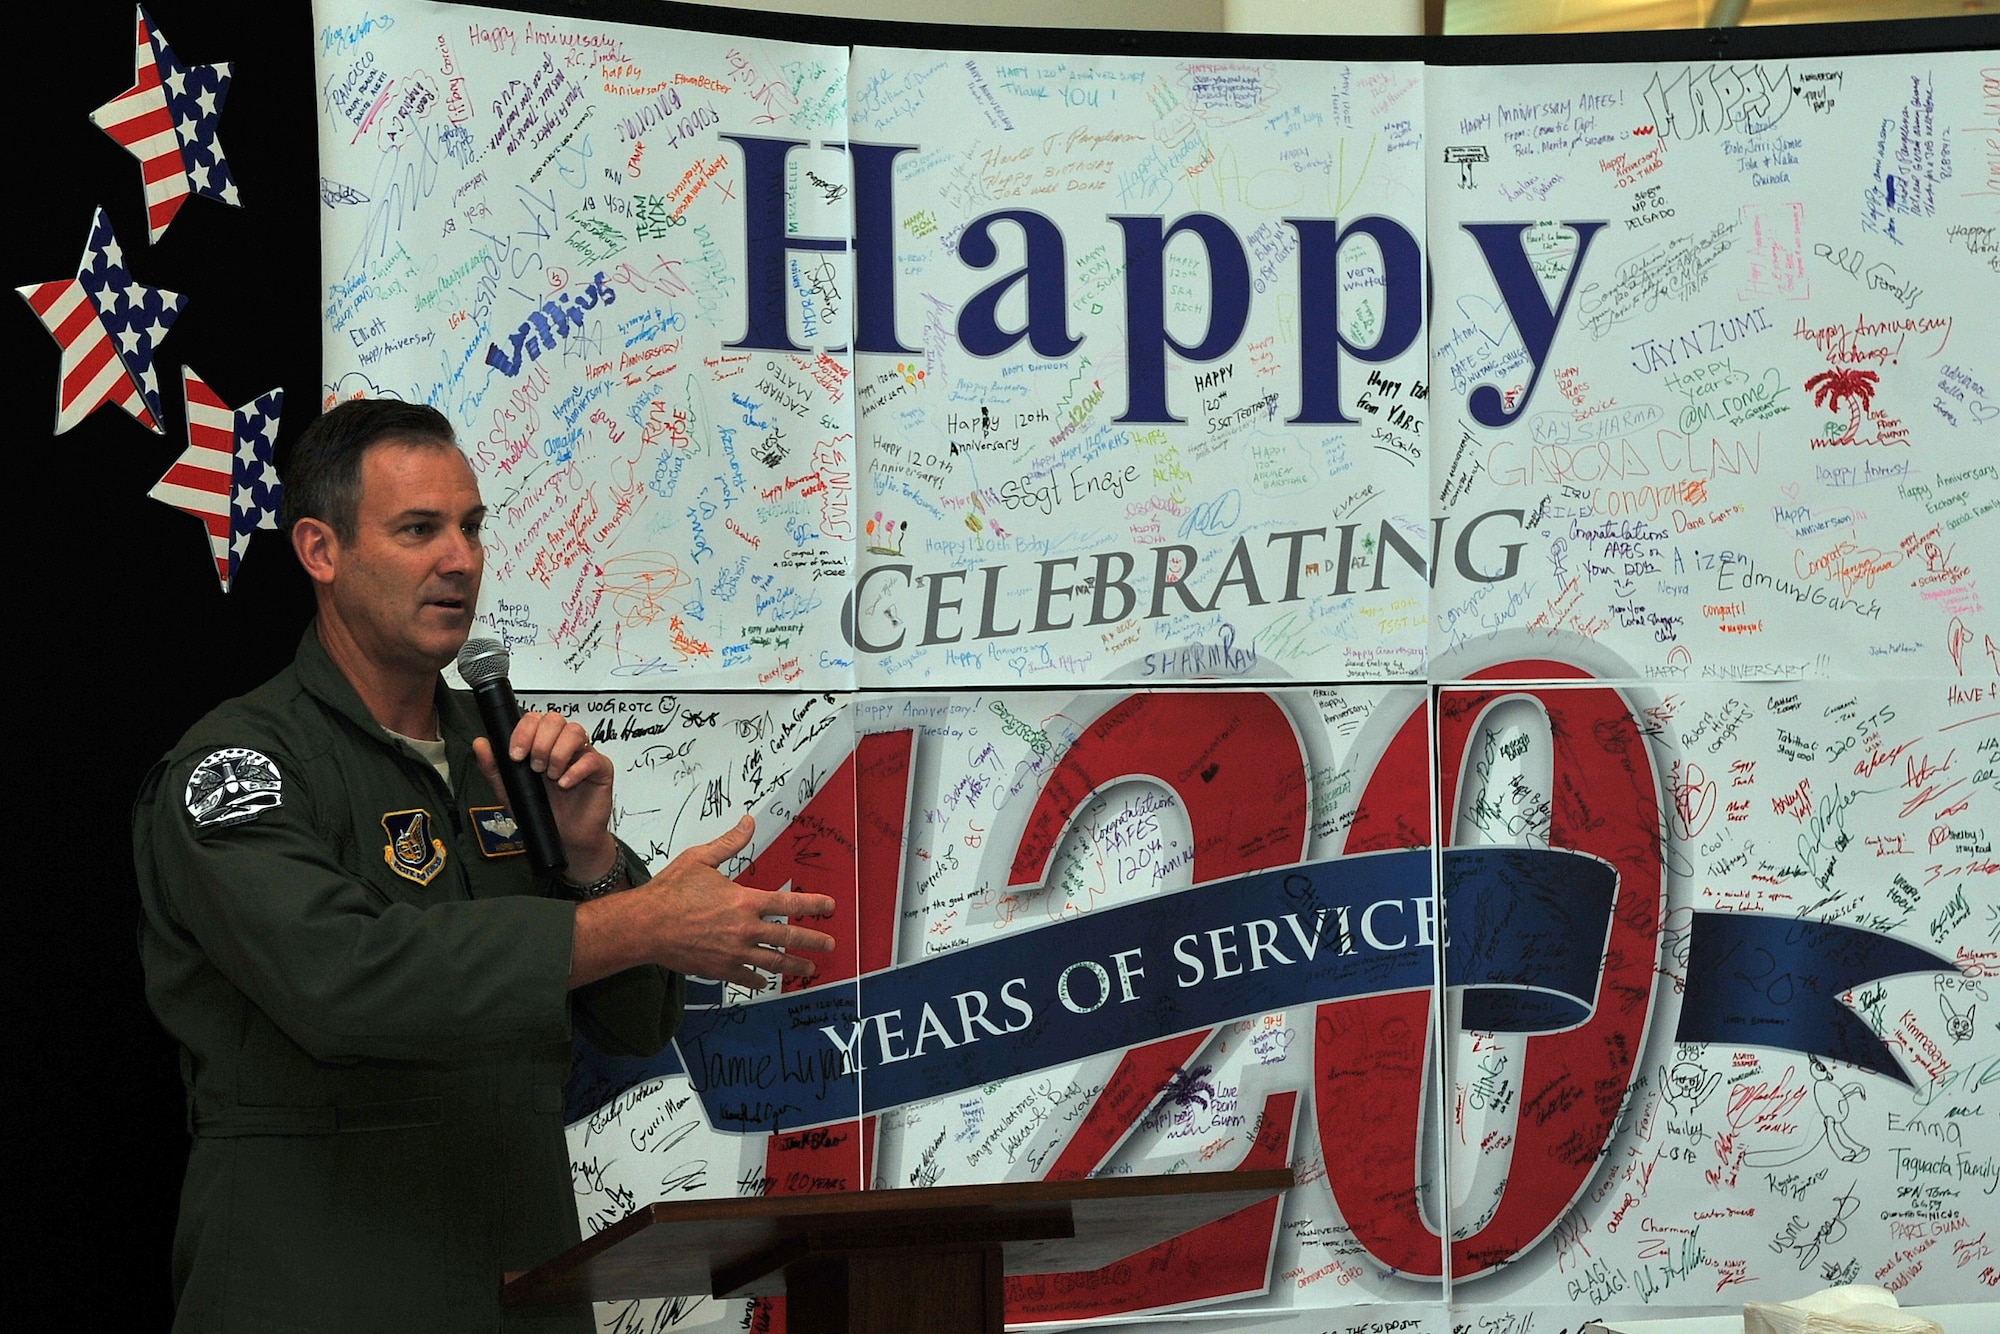 Brig. Gen. Andrew Toth, 36th Wing commander, delivers a speech July 25, 2015, at The Exchange at Andersen Air Force Base, Guam. The commander joined Exchange officials during a ceremony as they celebrated the 120th anniversary of the Army and Air Force Exchange Service. (U.S. Air Force photo by Tech. Sgt. Melissa B. White/Released